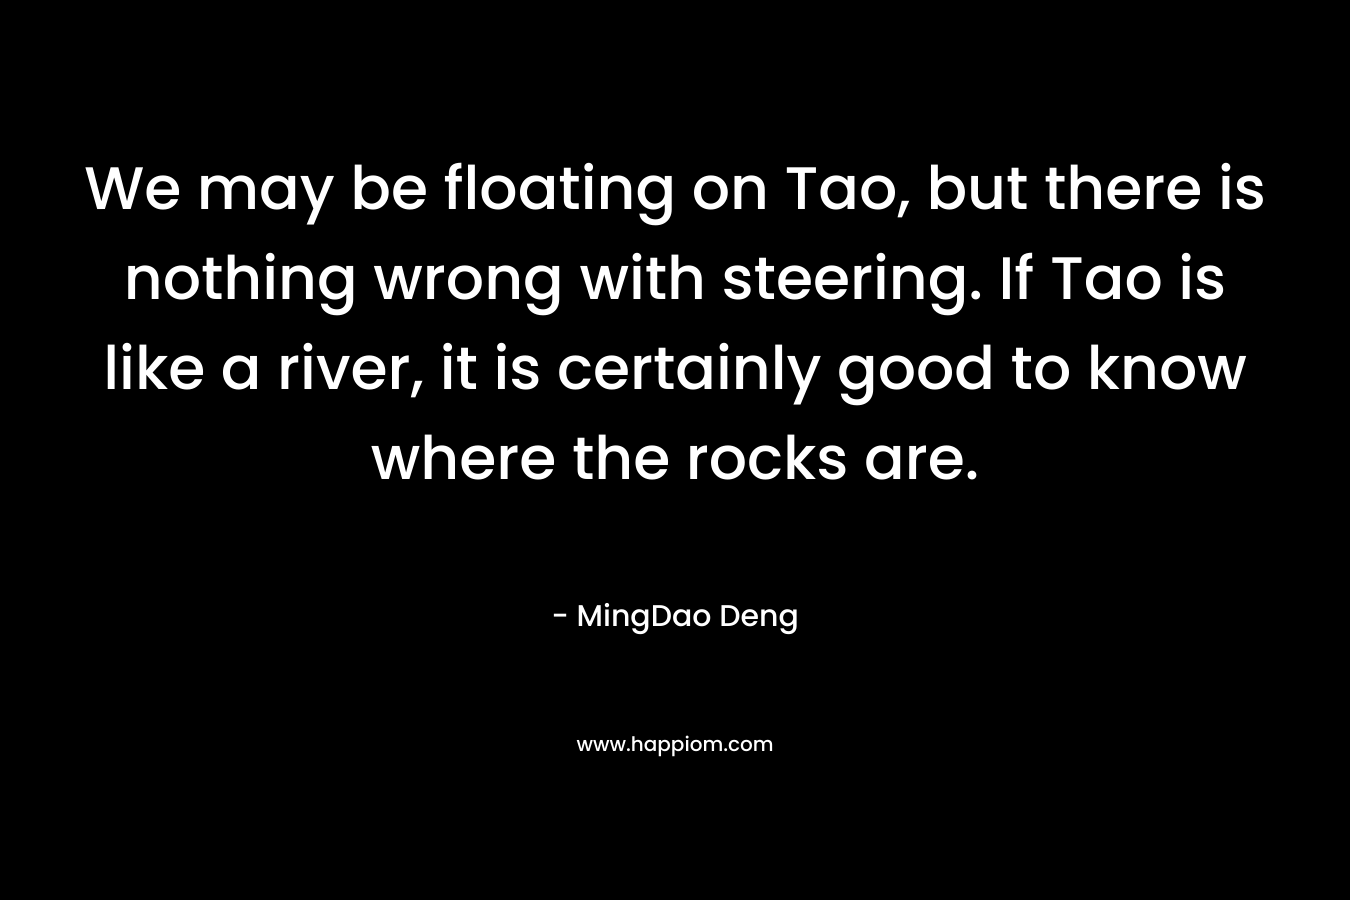 We may be floating on Tao, but there is nothing wrong with steering. If Tao is like a river, it is certainly good to know where the rocks are.